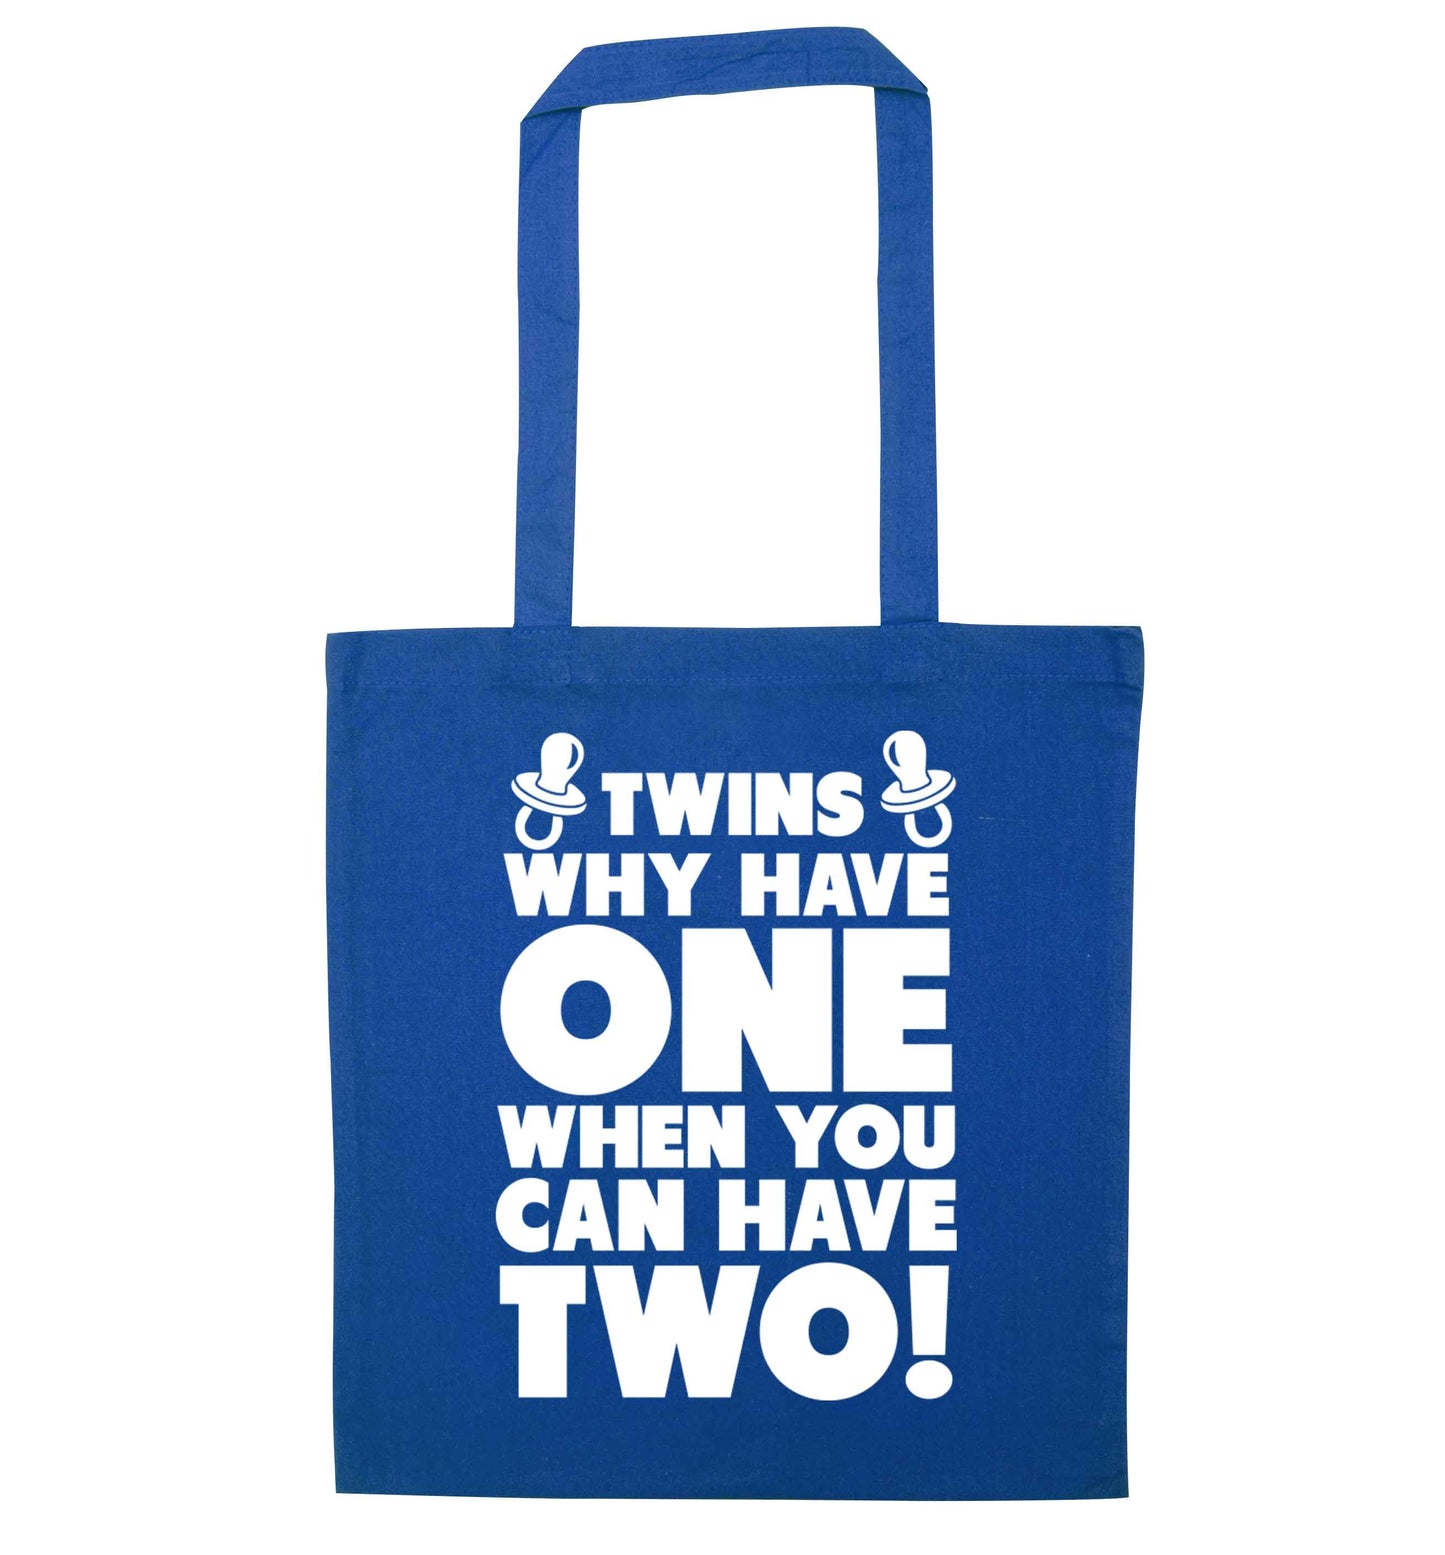 Twins why have one when you can have two blue tote bag